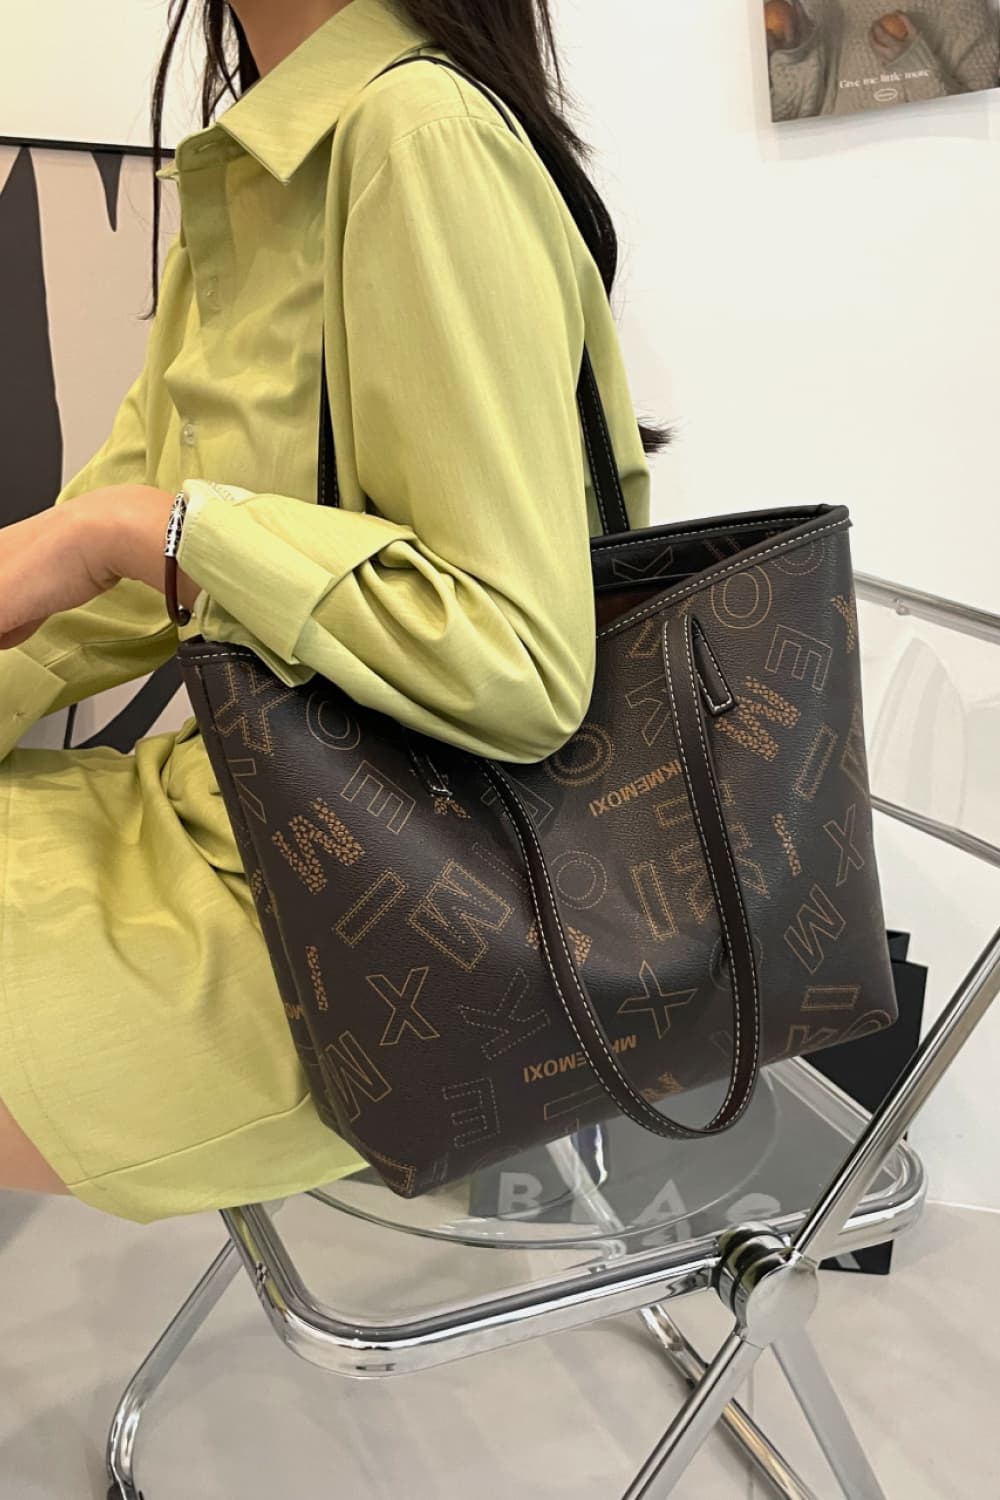 Louis Vuitton Neverfull Bags for sale in Green Bay, Wisconsin